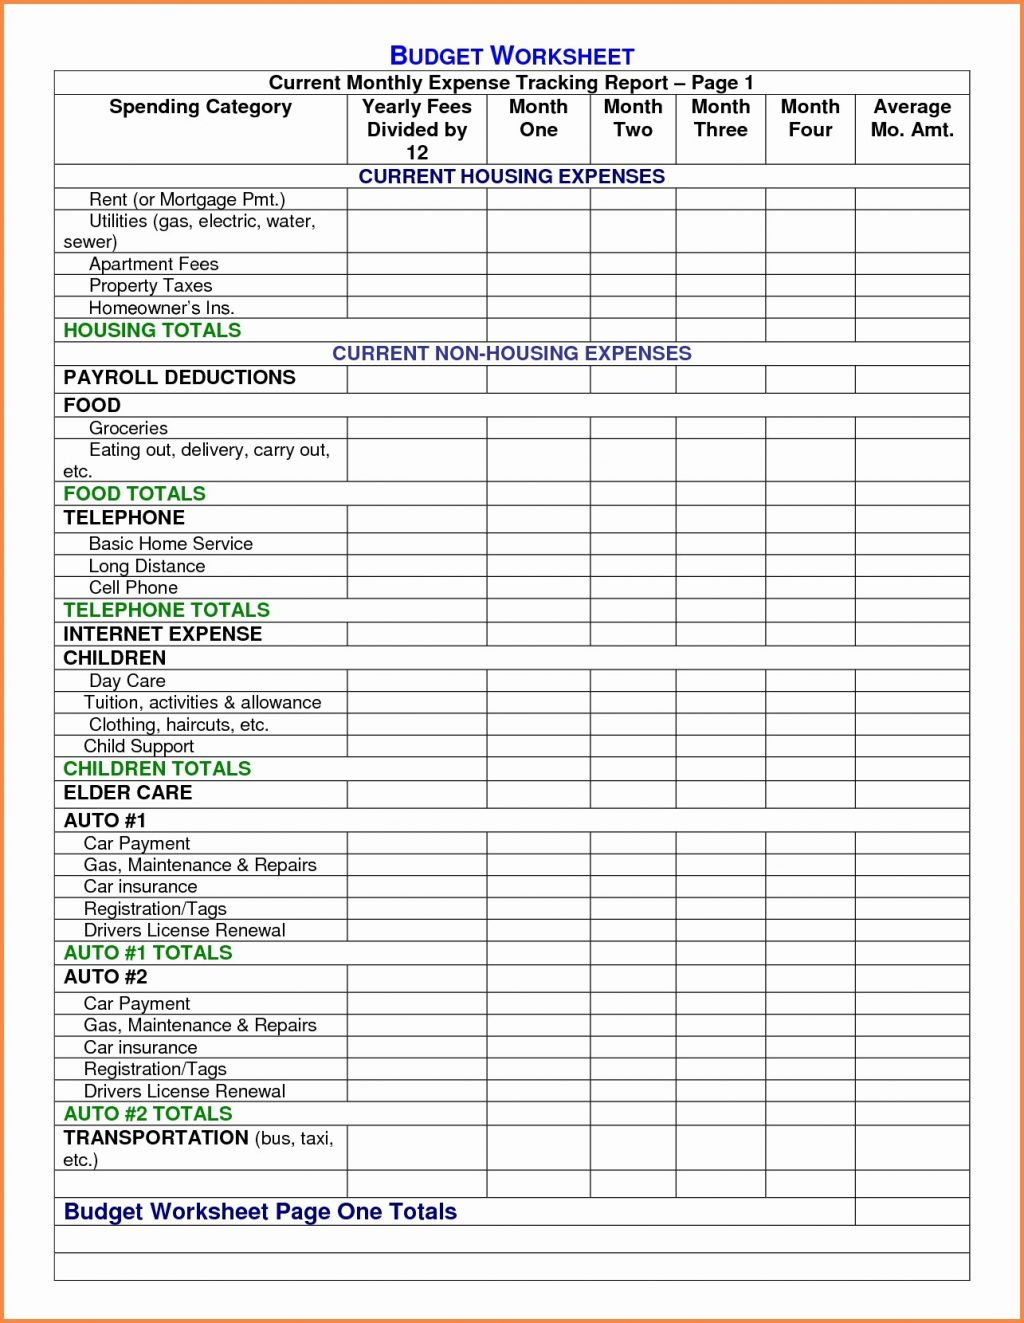 Monthly Expenses Readsheet Template Business Budget Save intended for Monthly Bills Worksheet